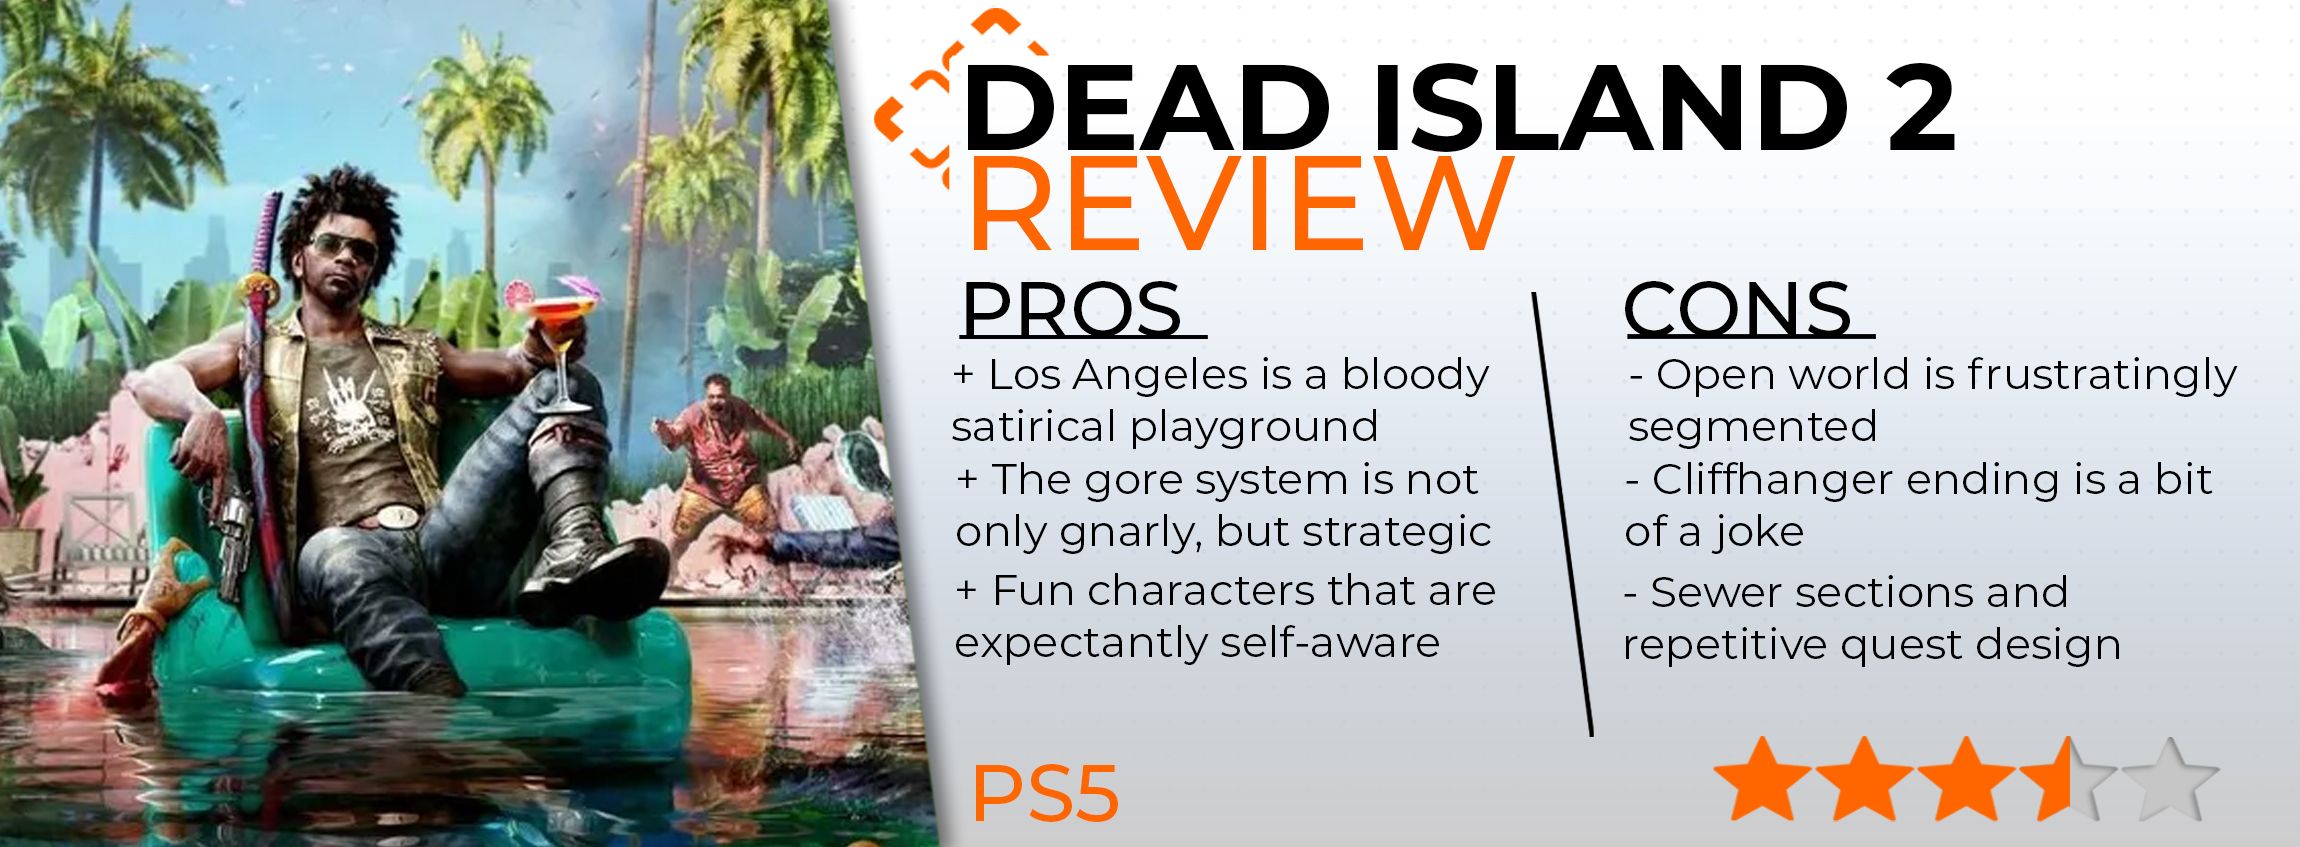 Dead Island 2 review card